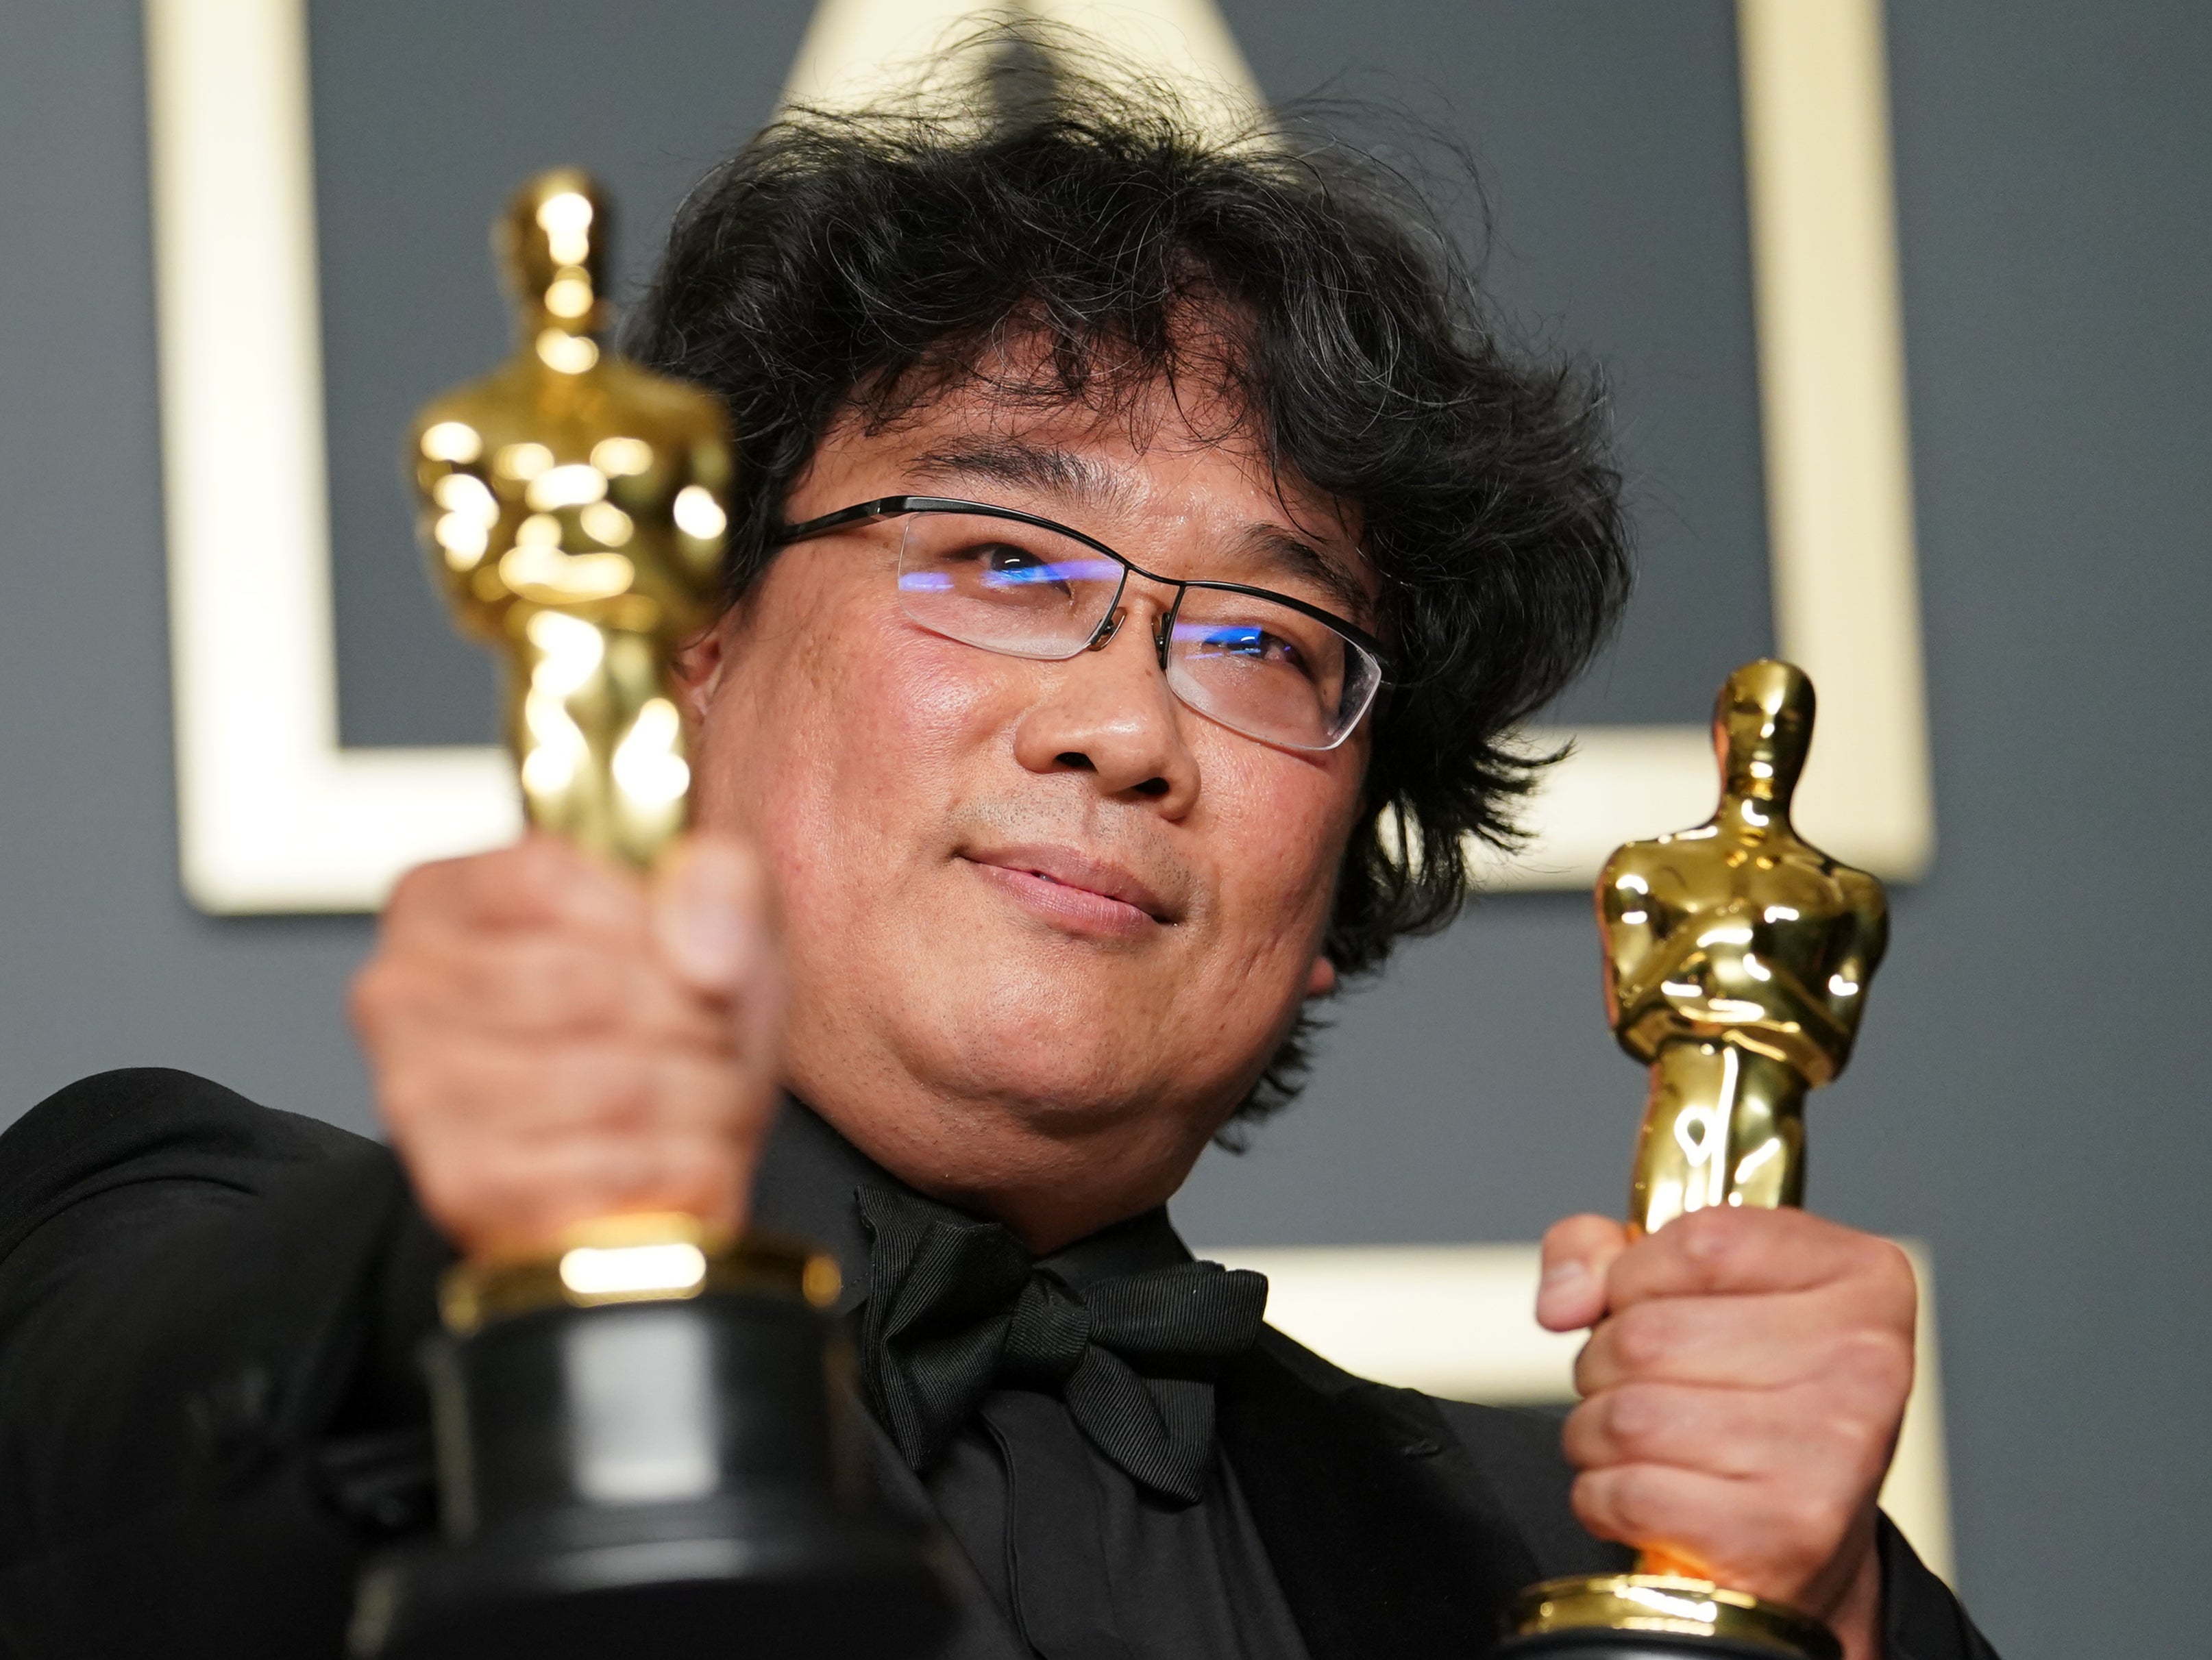 Hold tight: ‘Parasite’ director Bong Joon Ho at last year’s Academy Awards, which pulled the Oscars’ worst viewing figures – 23.6 million – since 1974